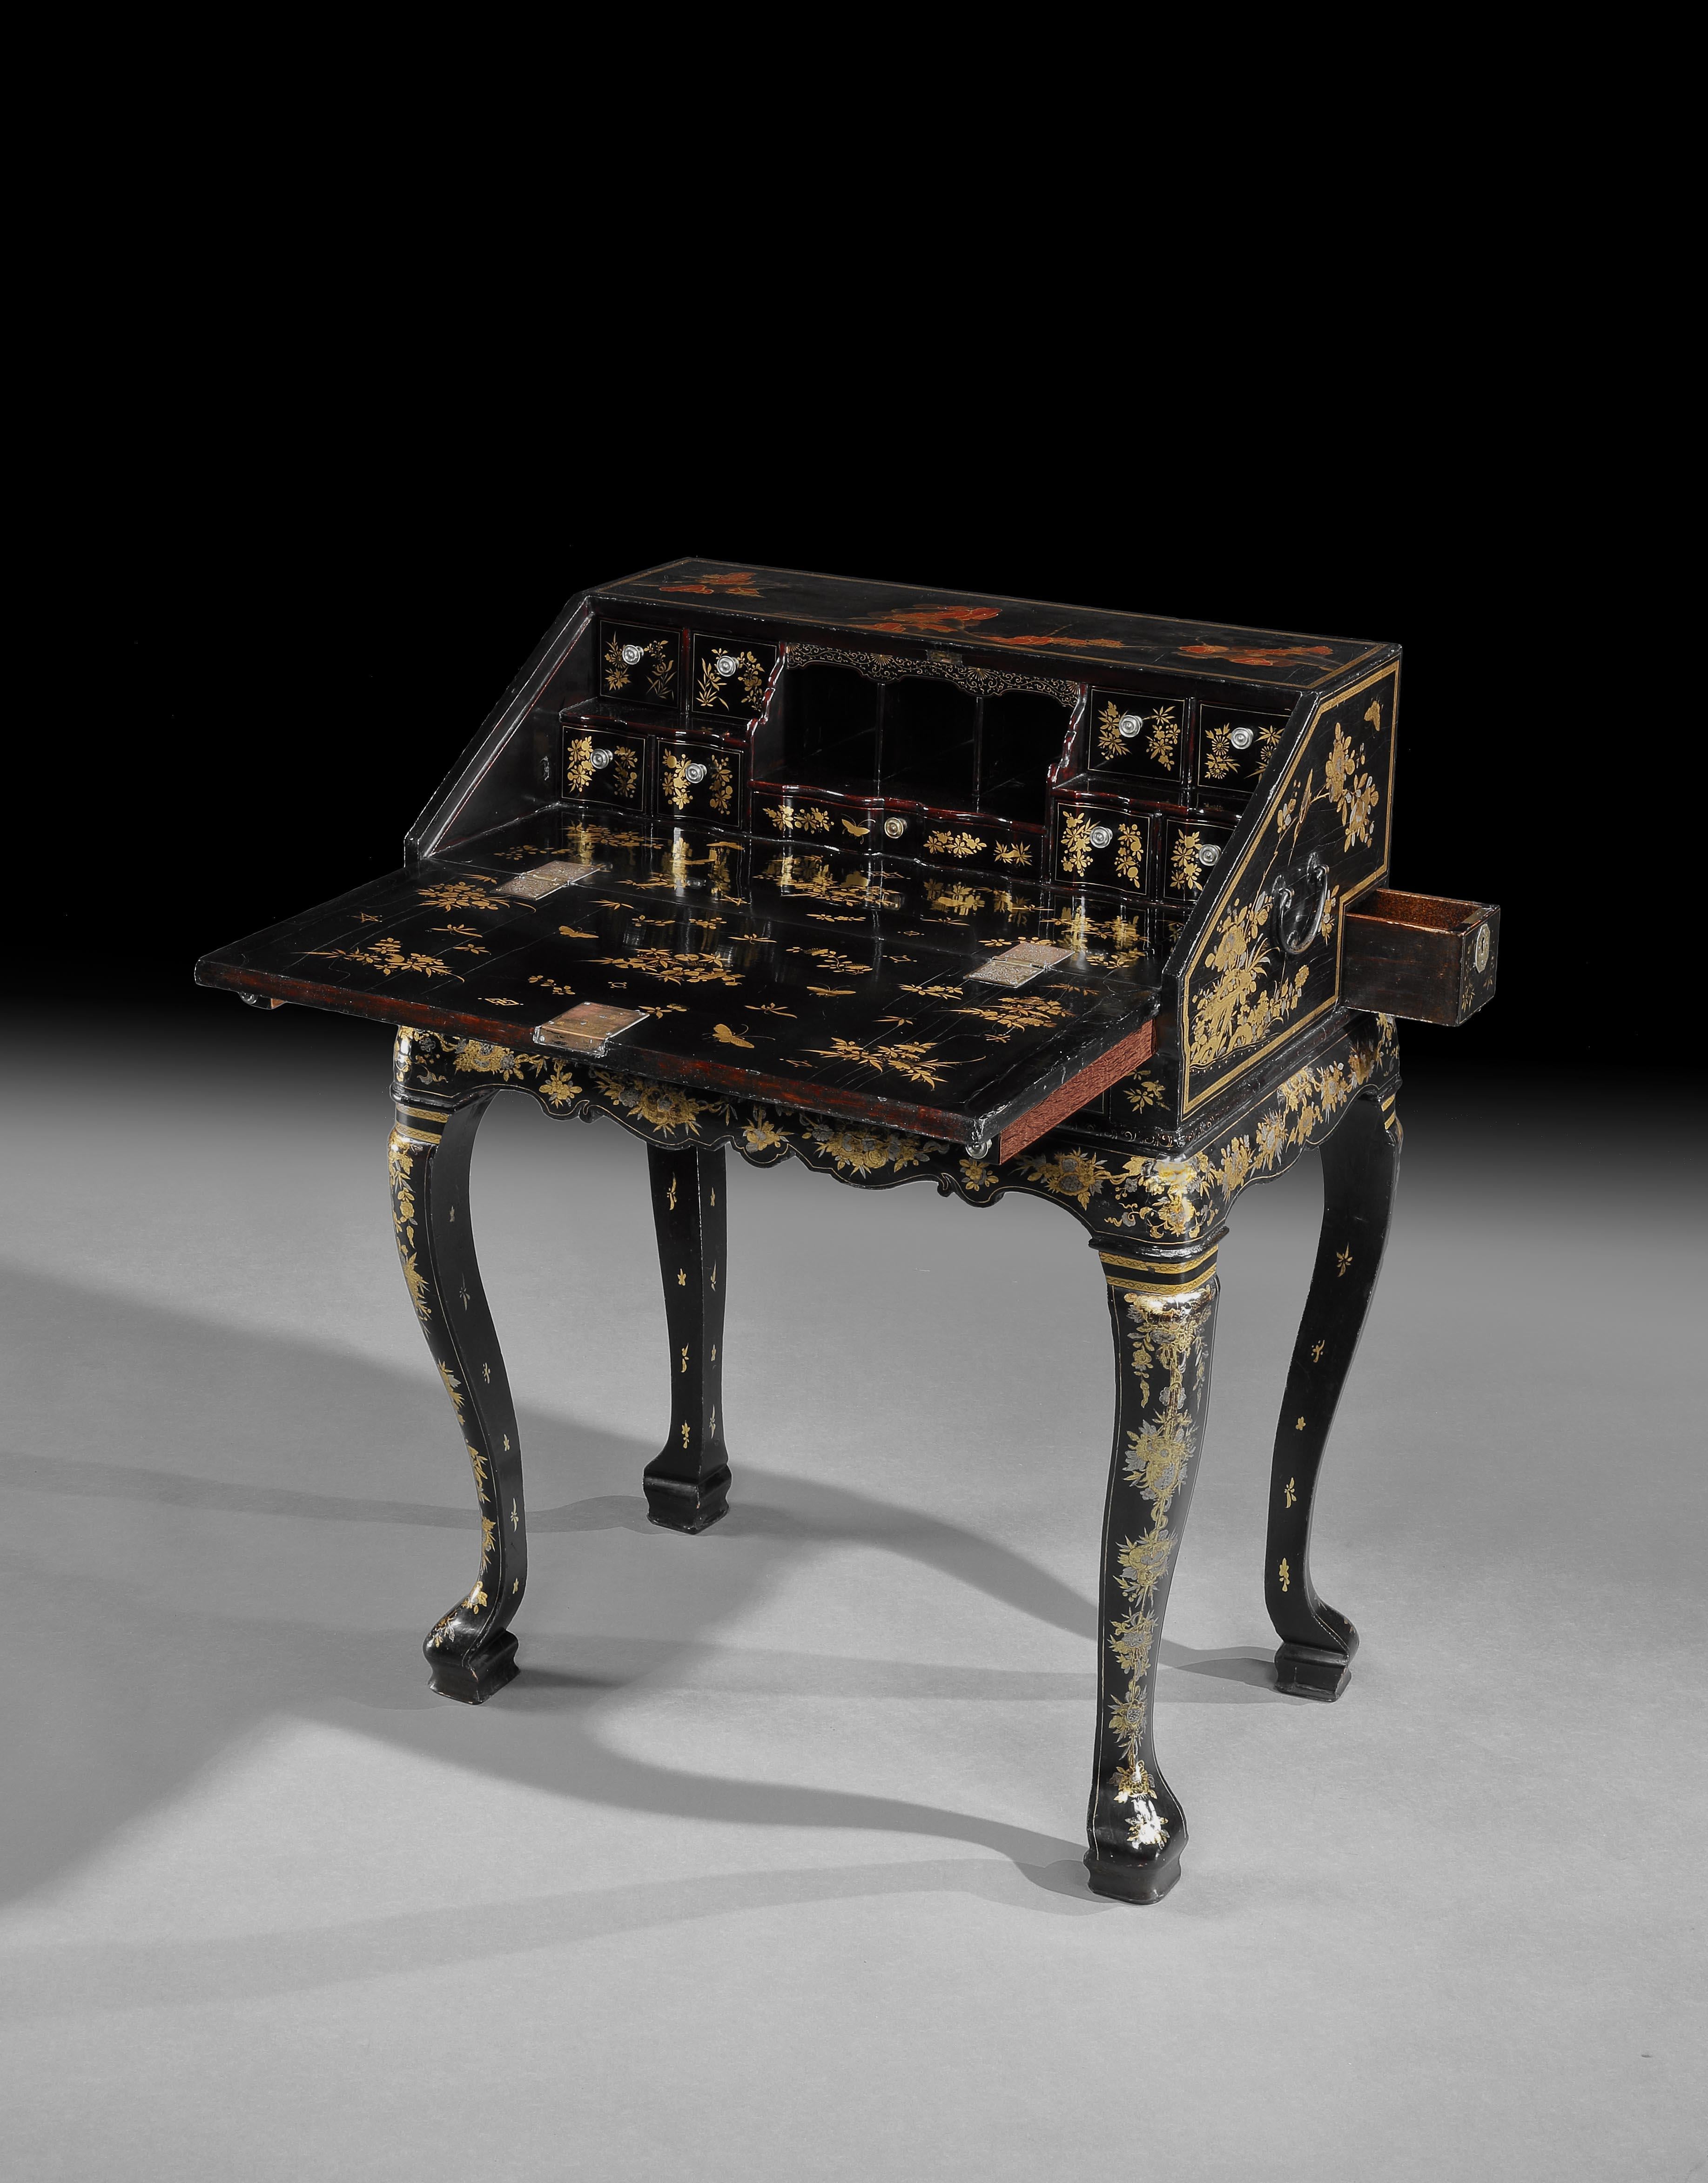 A fine and rare mid 18th century Chinese Export lacquer bureau on stand. Probably made in Canton specifically for the export trade to meet the demands of the European market. Beautifully decorated throughout with gilded decorations on a black